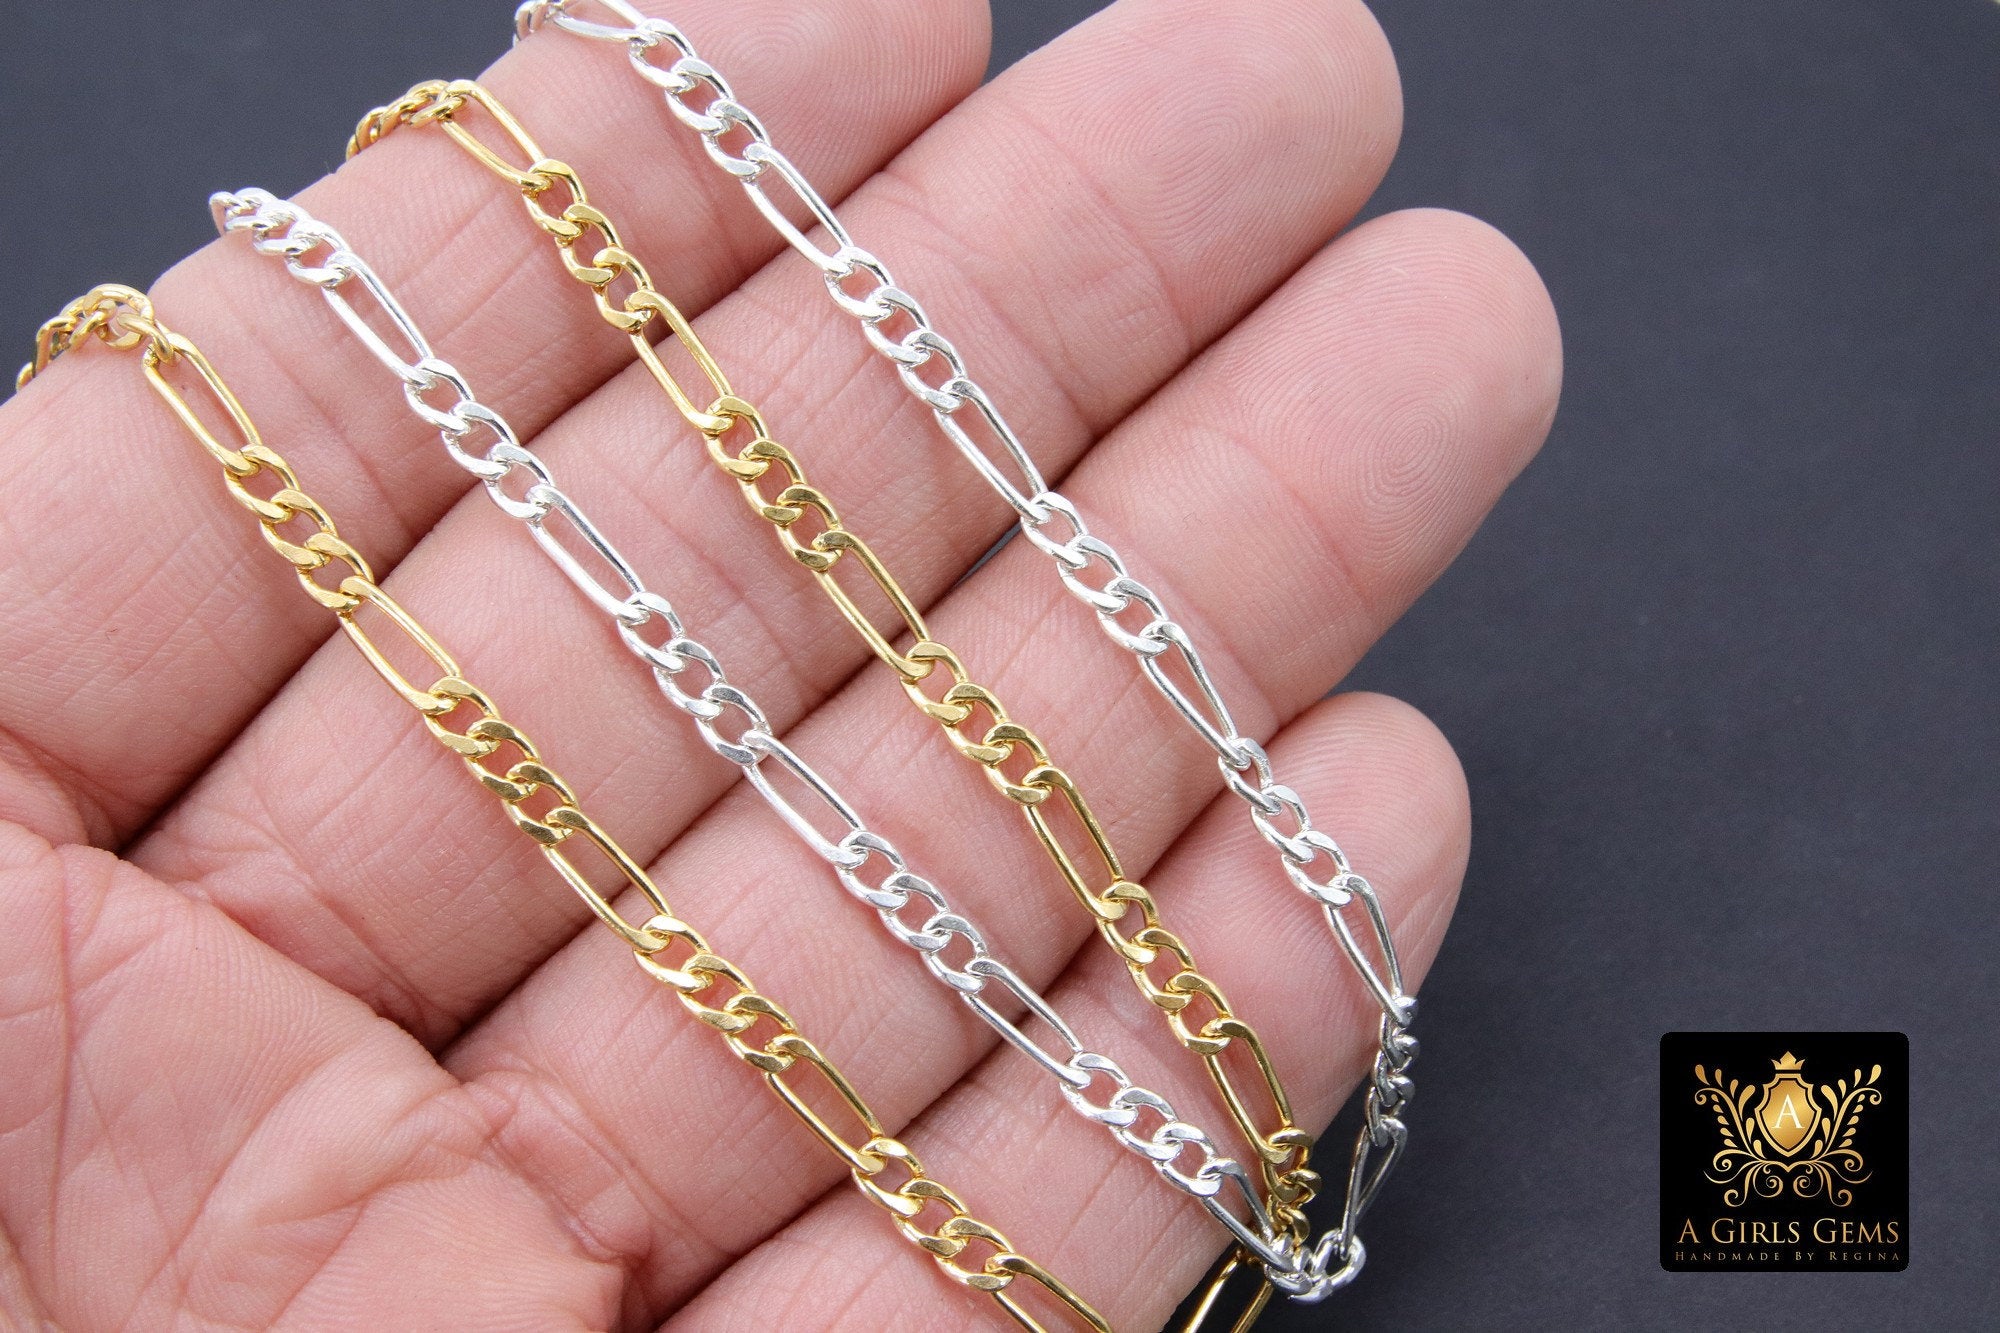 14 K Gold Filled Figaro Chains, 925 Sterling Silver 10 x 3.8 mm Large Unfinished Chain Link CH #664, Paperclip Long and Short Rolo CH #870